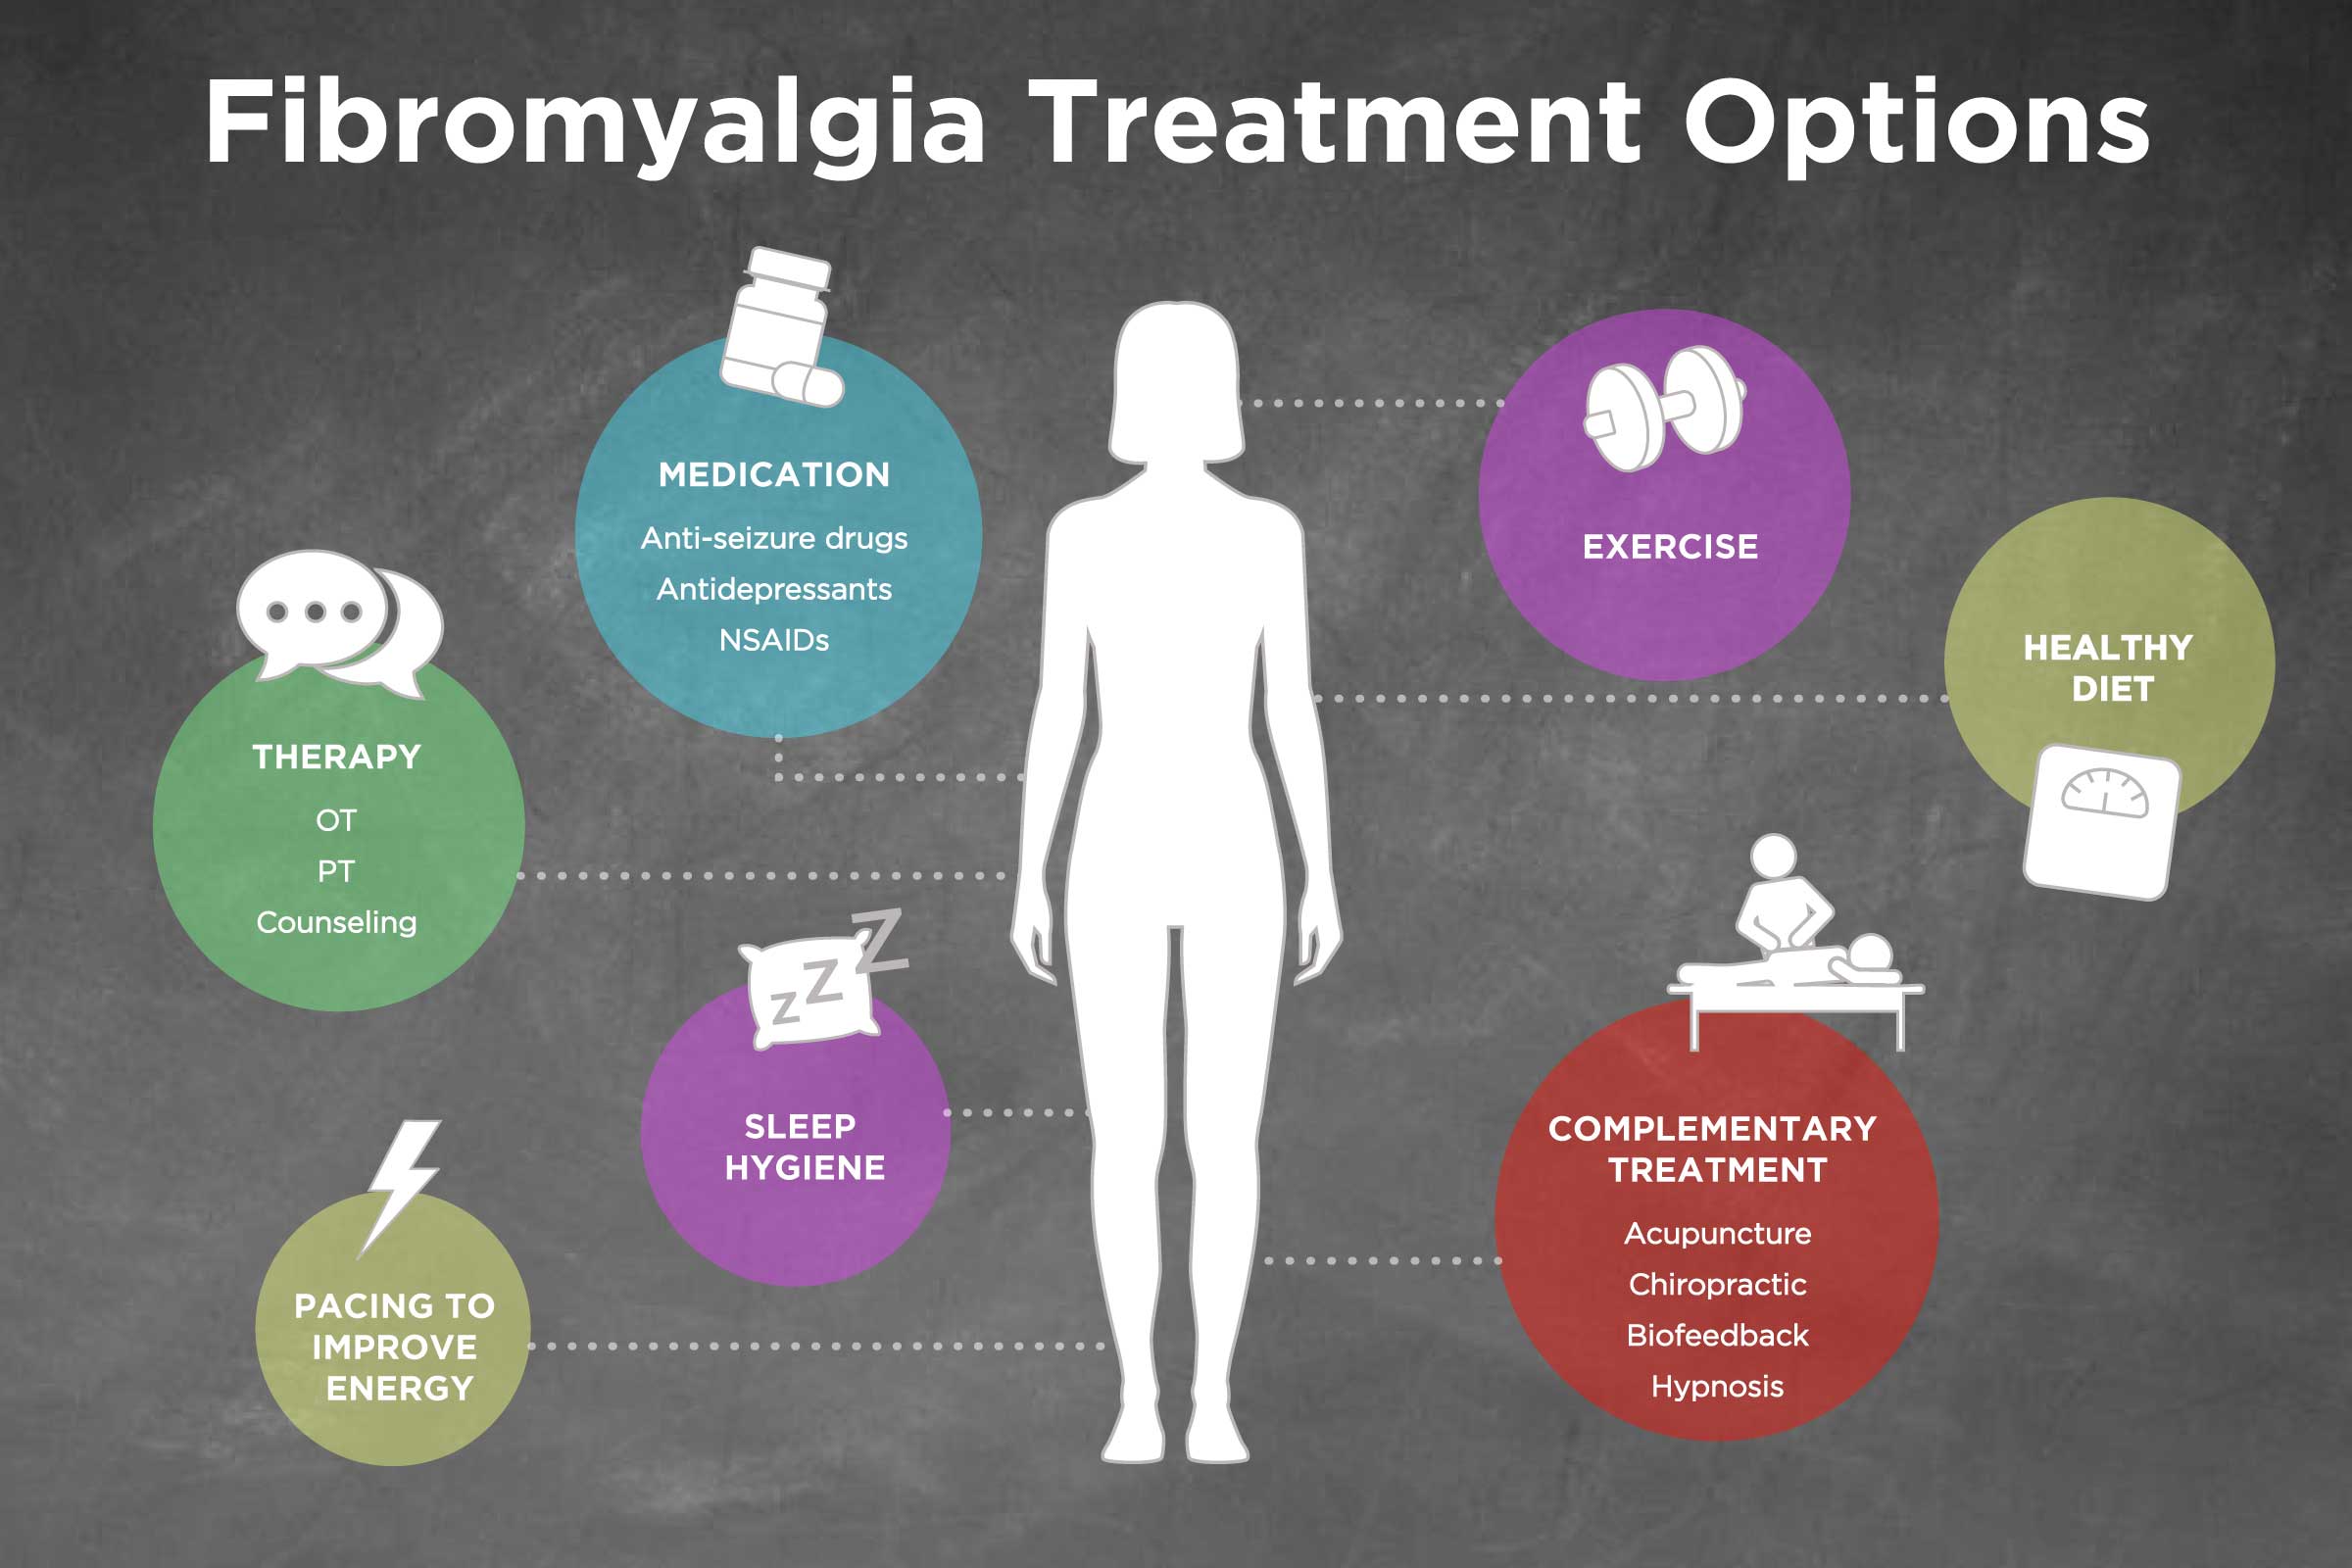 Fibromyalgia Treatment: Medications, Exercise, Diet, and More